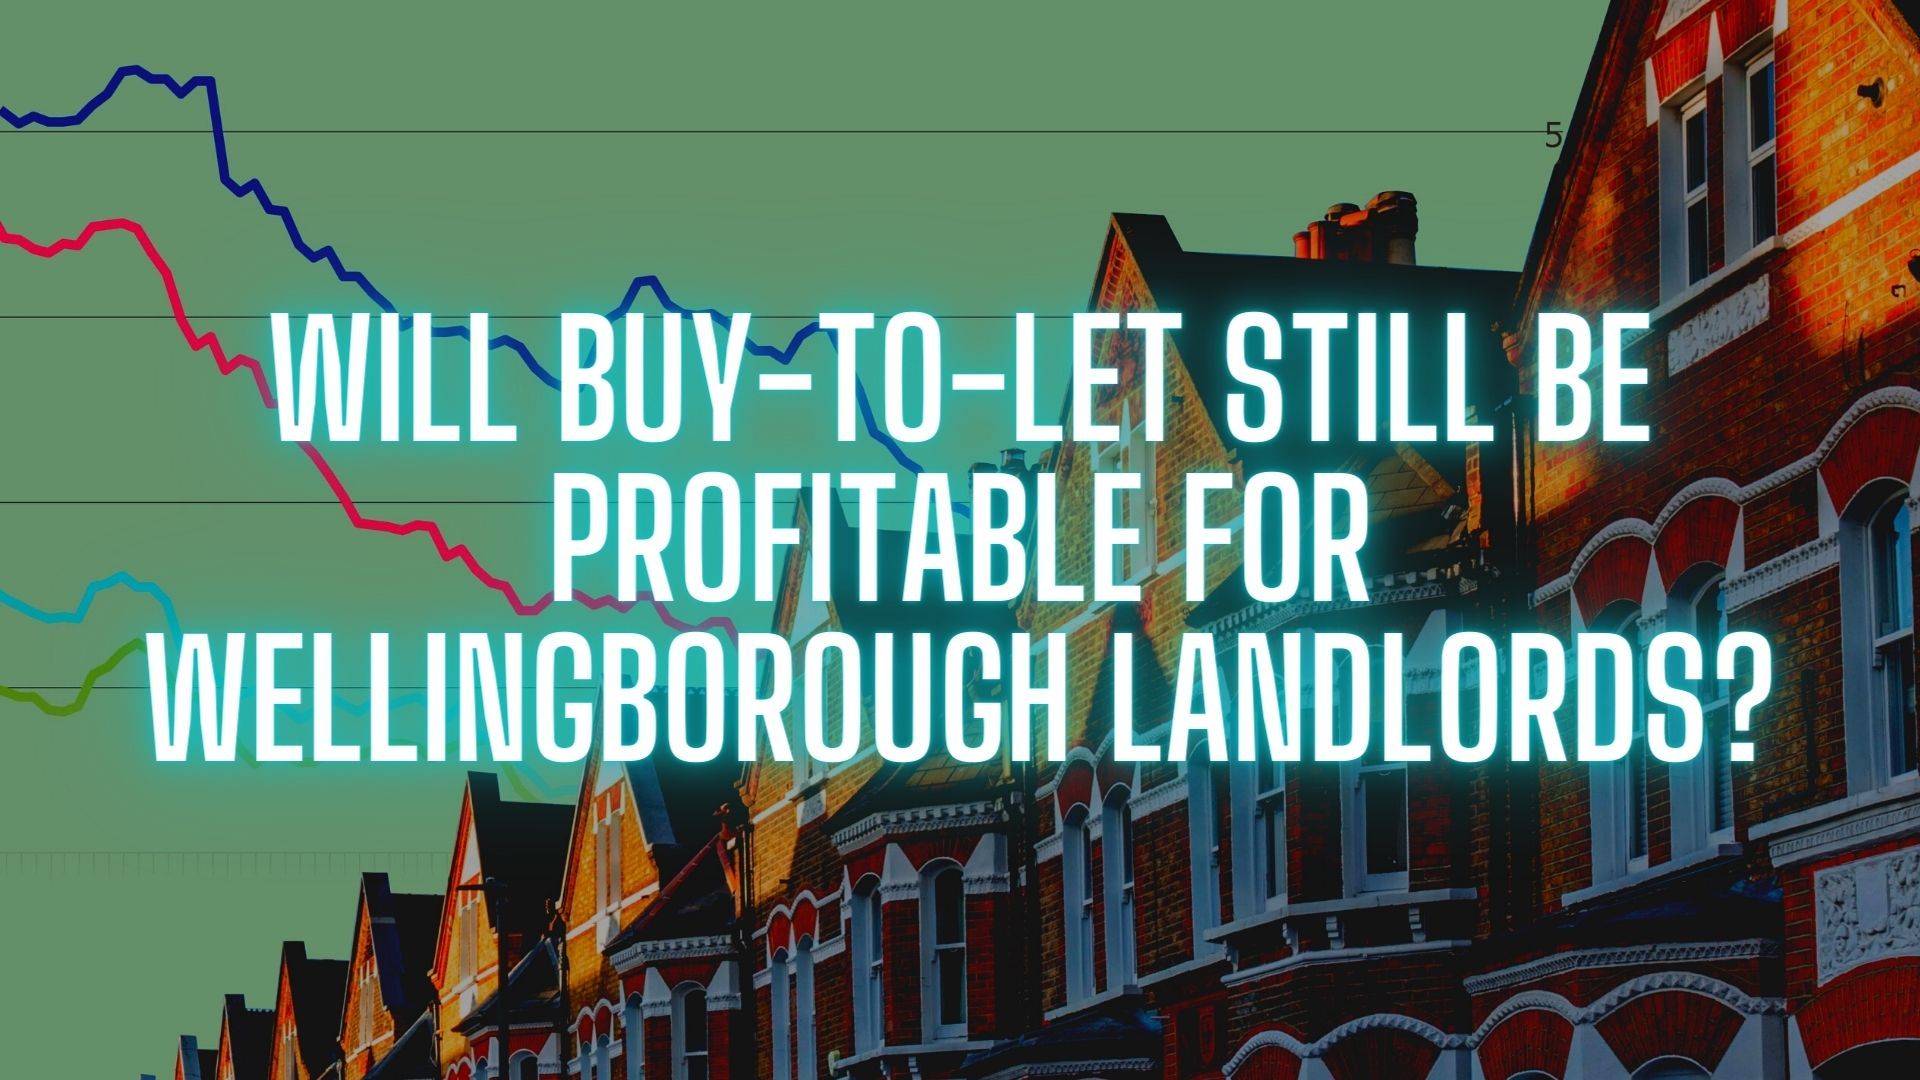 Will Buy-To-Let Still Be Profitable for Wellingborough Landlords?